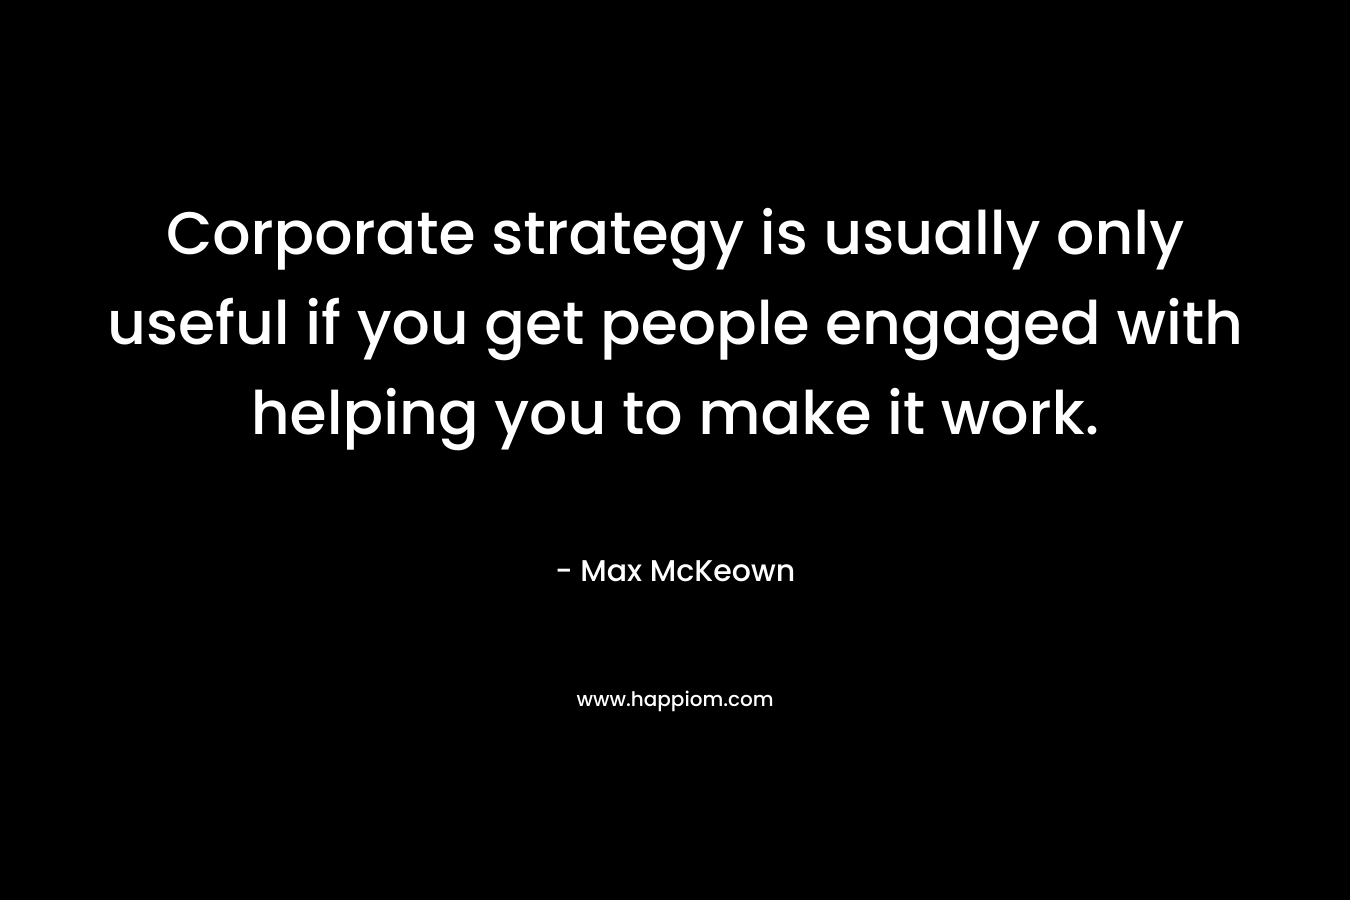 Corporate strategy is usually only useful if you get people engaged with helping you to make it work. – Max McKeown